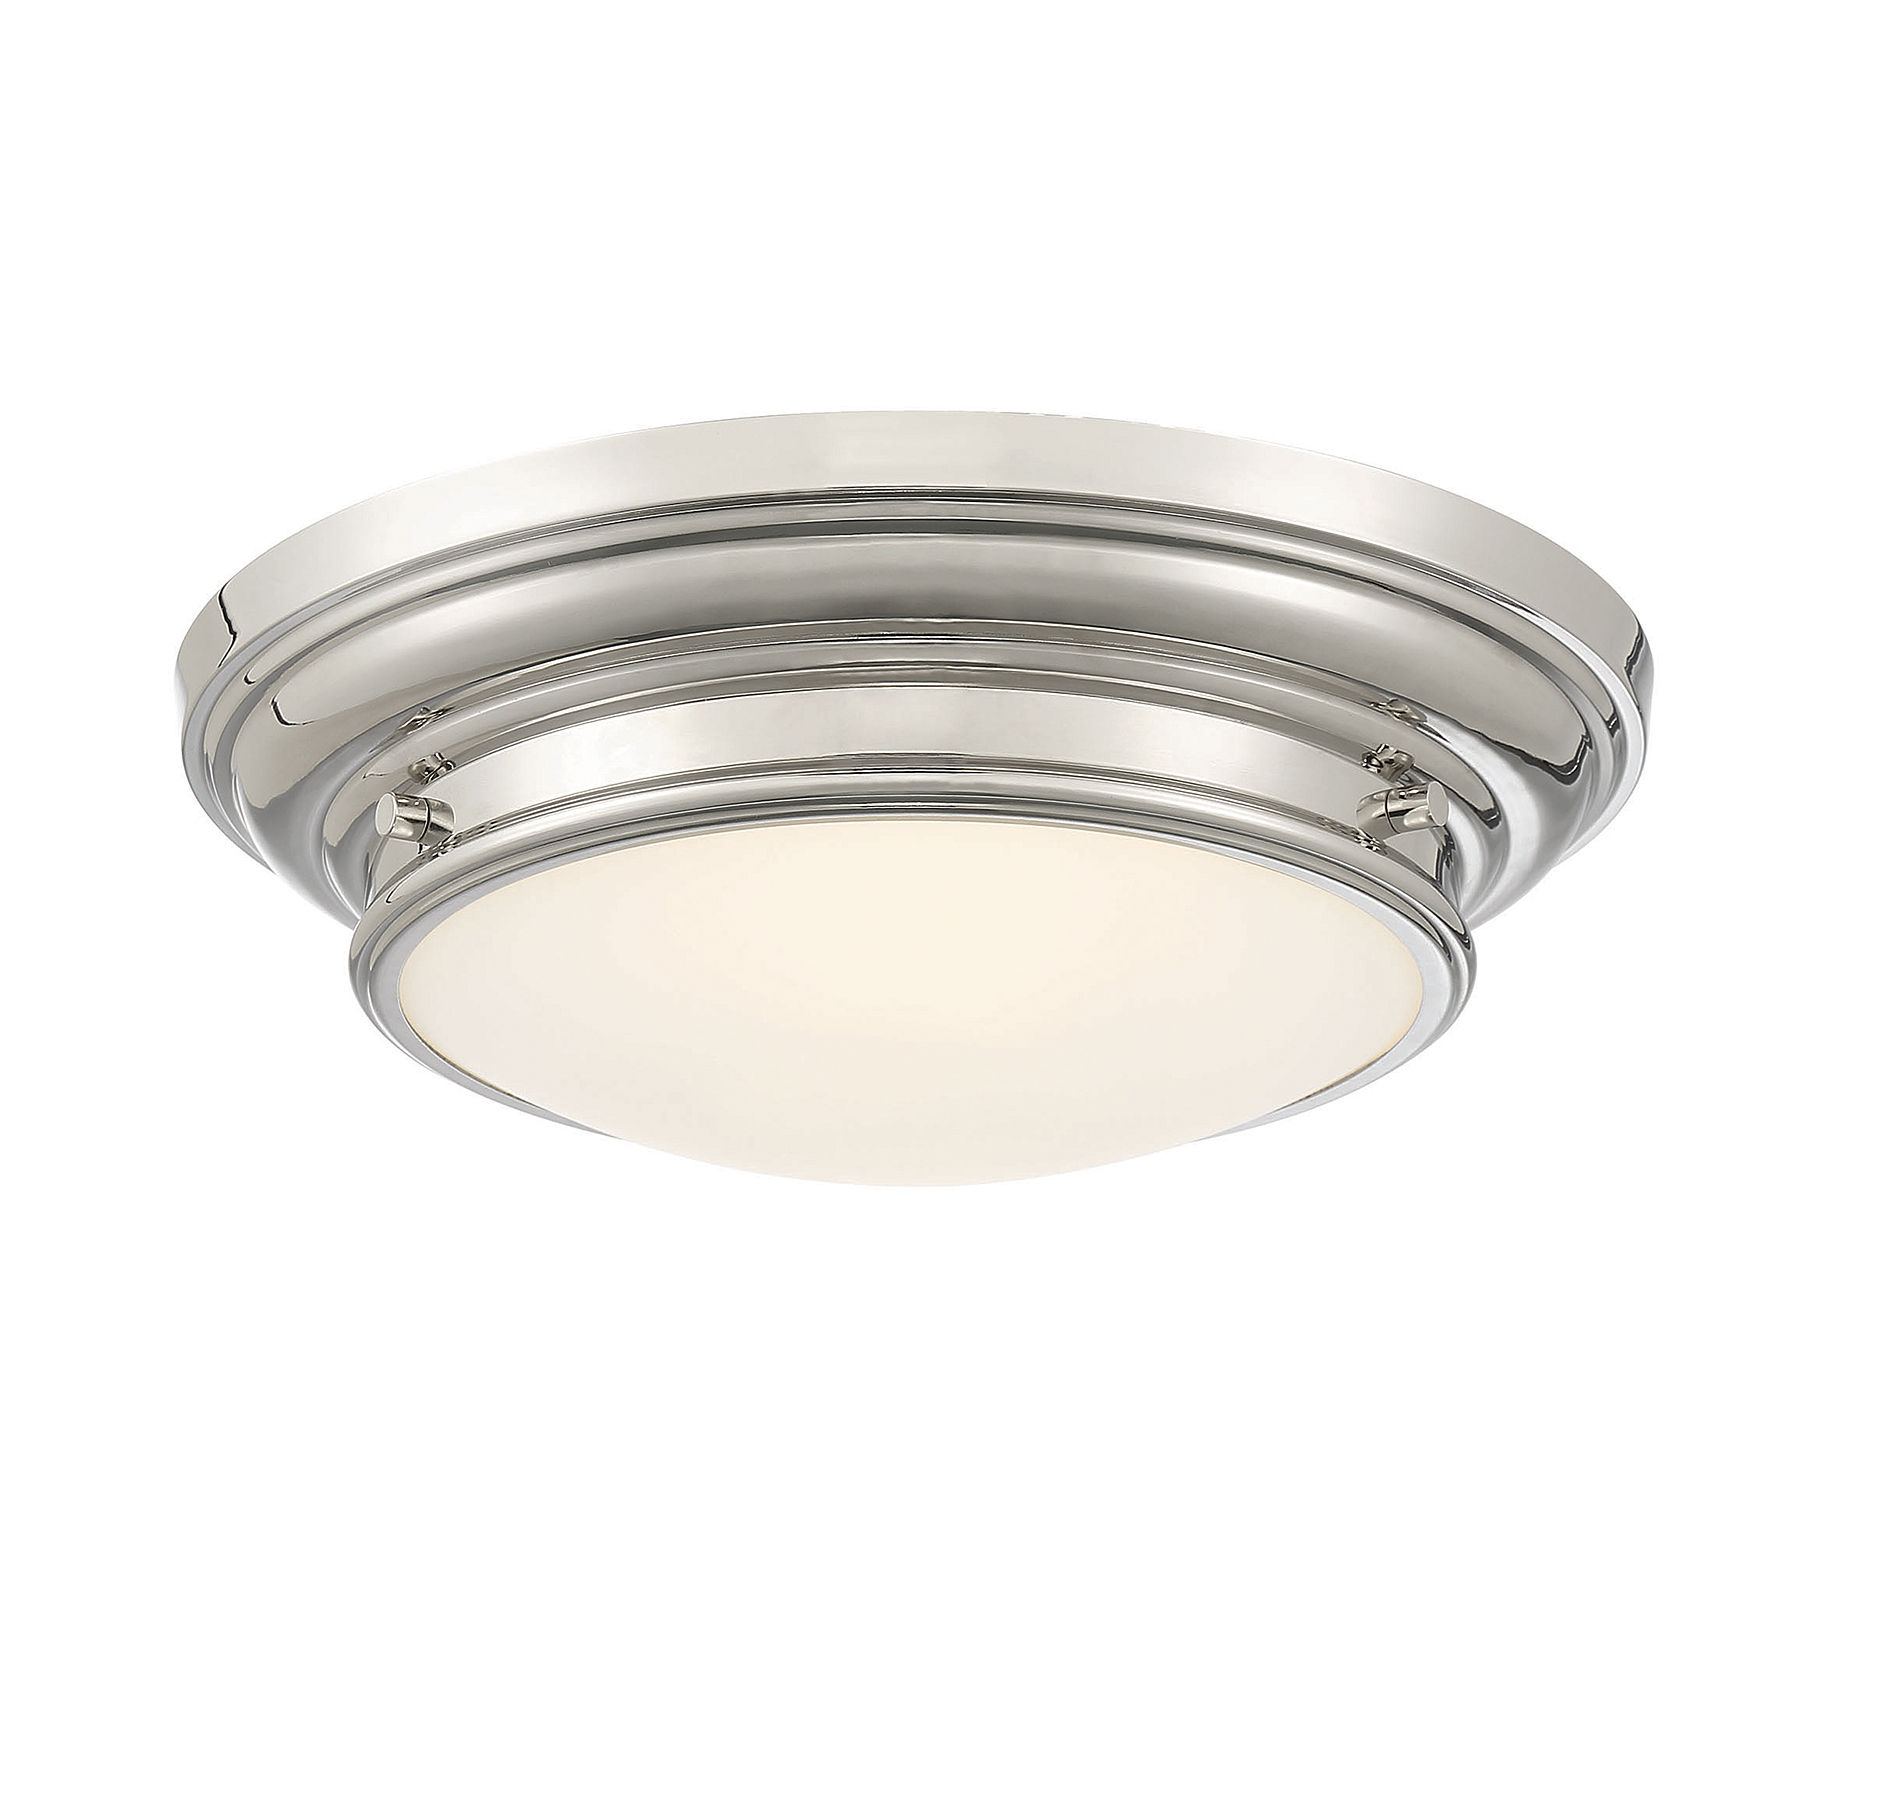 Monument 617623 Contemporary Style Ceiling Mount Light in Brushed Nickel 